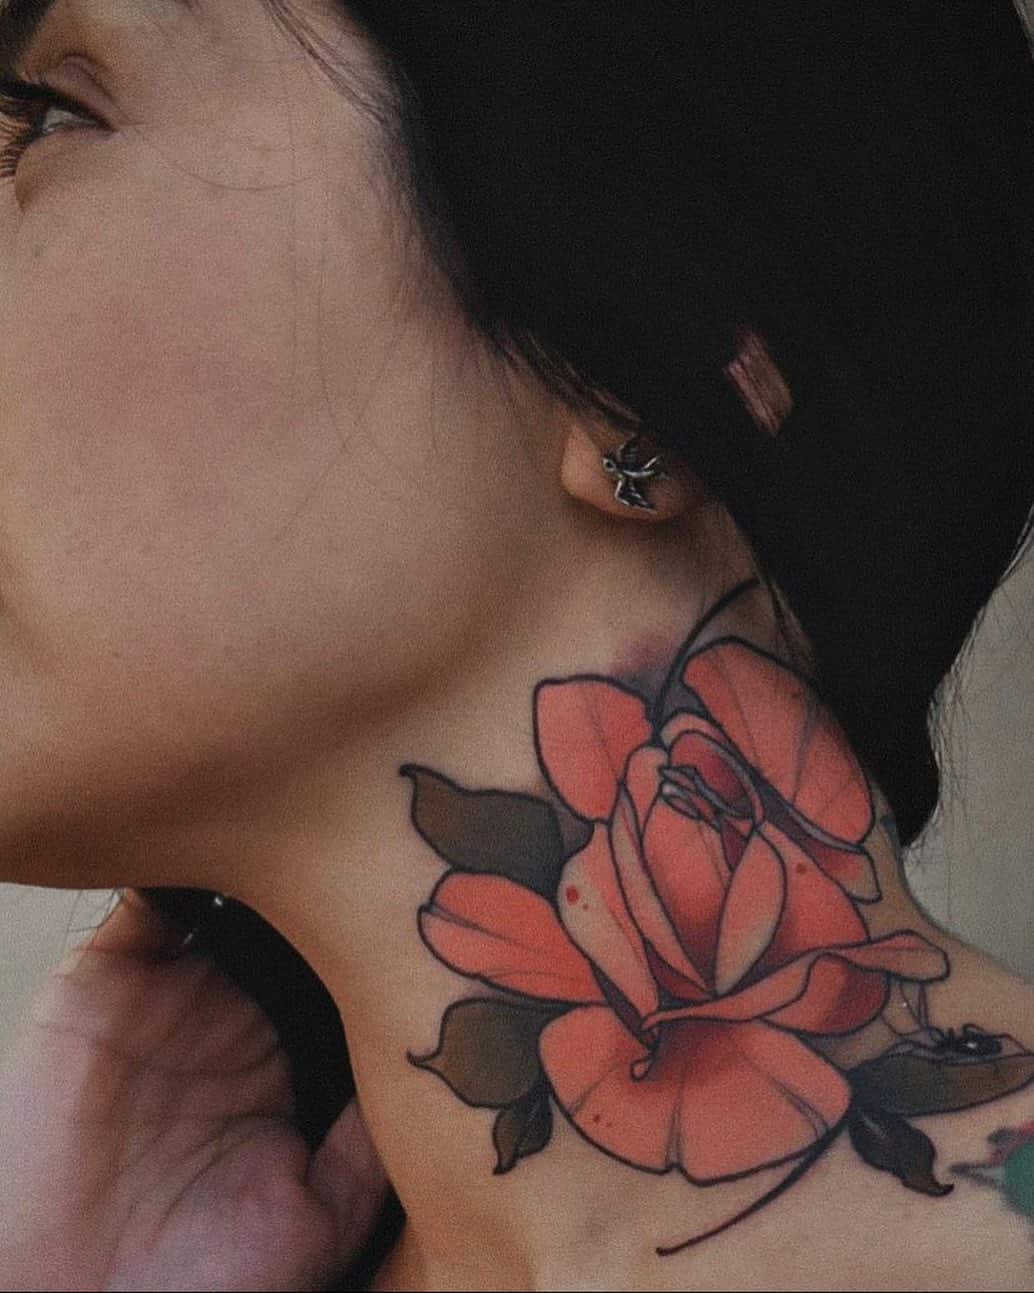 Tattoo tagged with: kanenavasard, flower, small, single needle, tiny, back  of neck, rose, ifttt, little, nature | inked-app.com